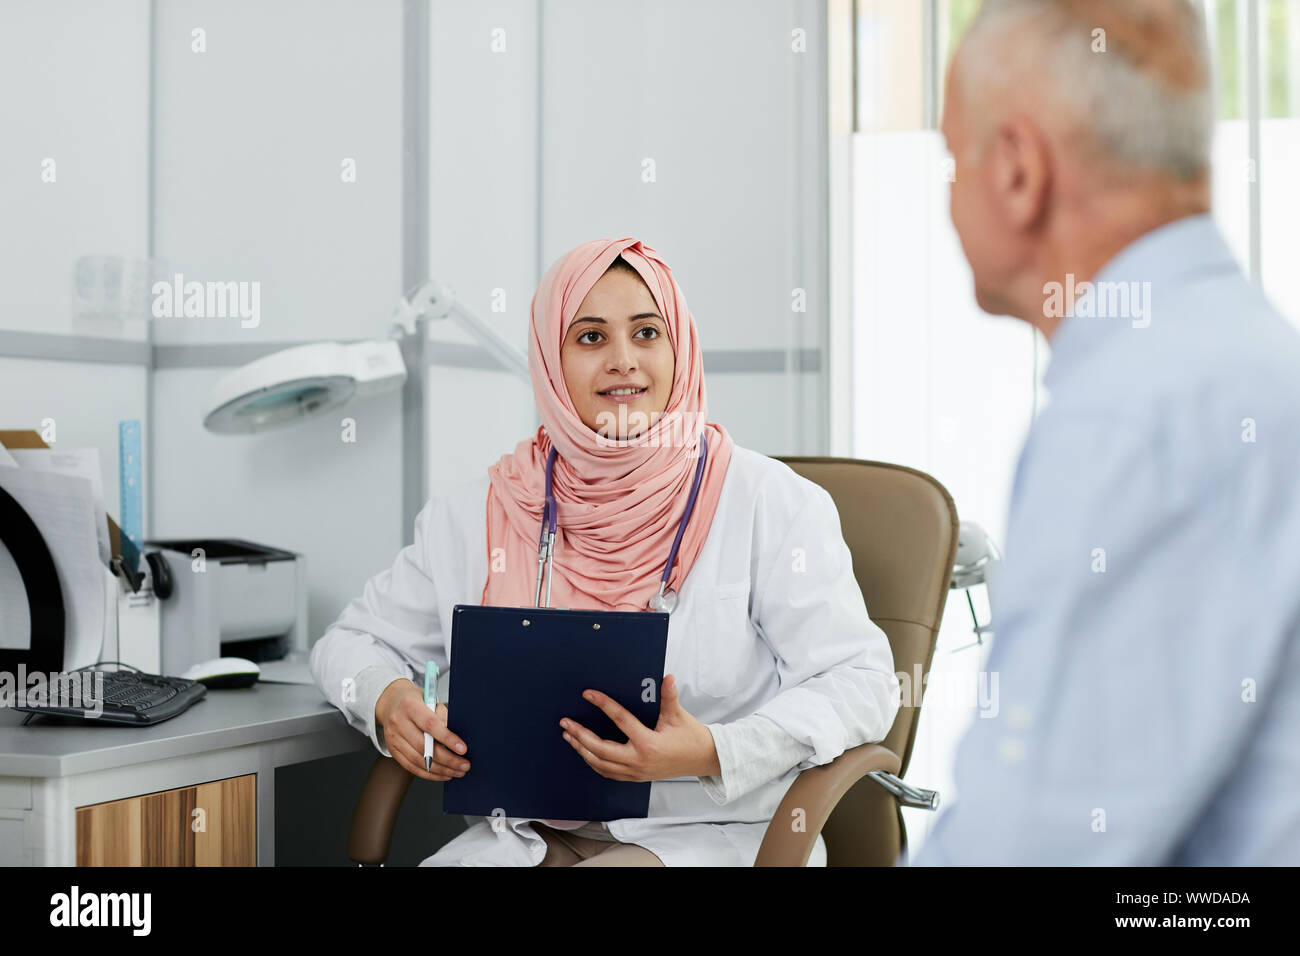 Portrait Of Young Arab Woman Working As Nurse In Medical Clinic